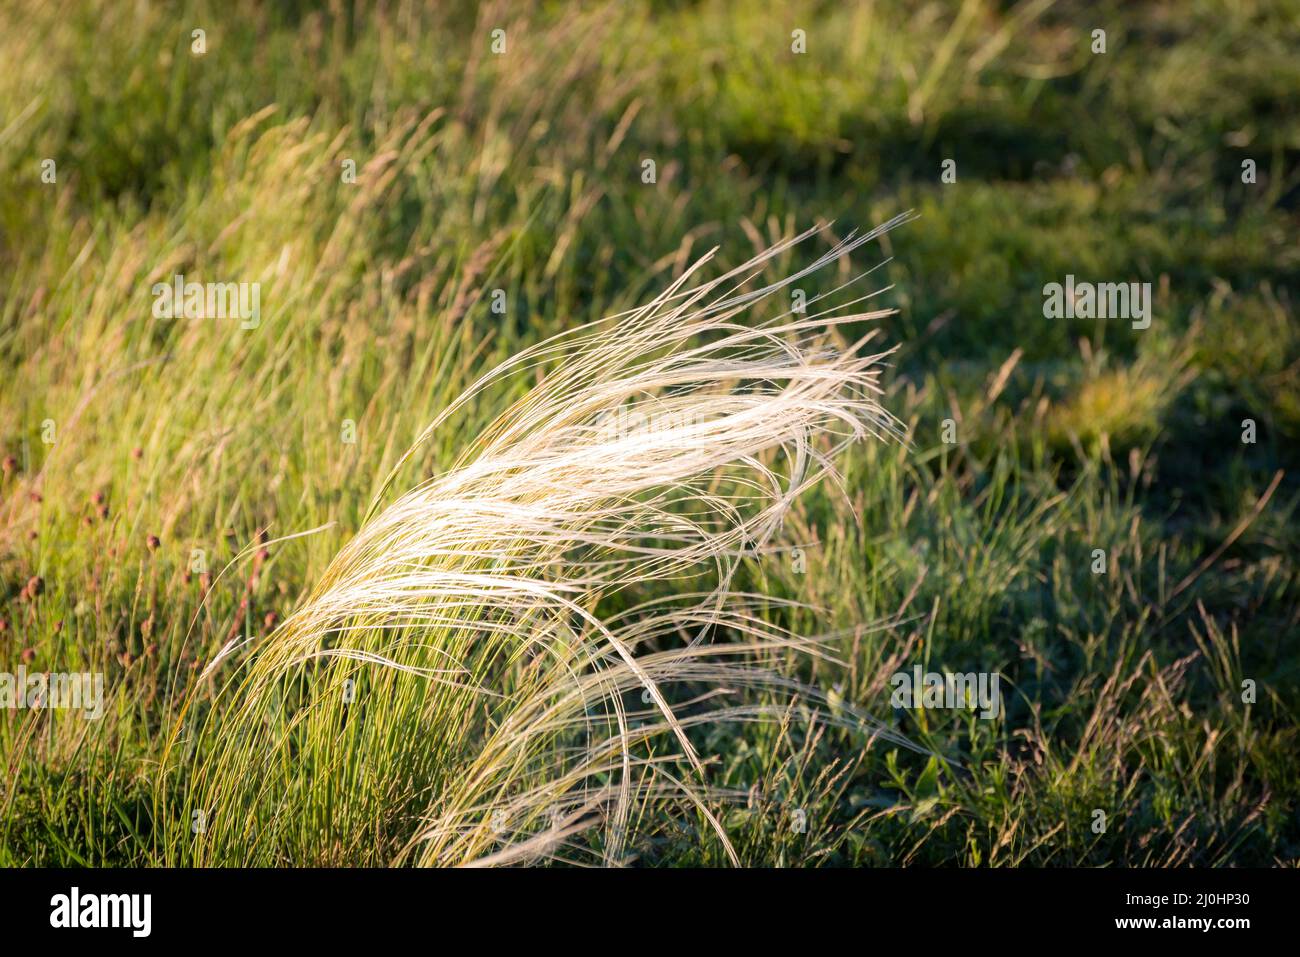 Feather grass, needle grass, or spear grass (Stipa sp.) Crimea, Stock Photo